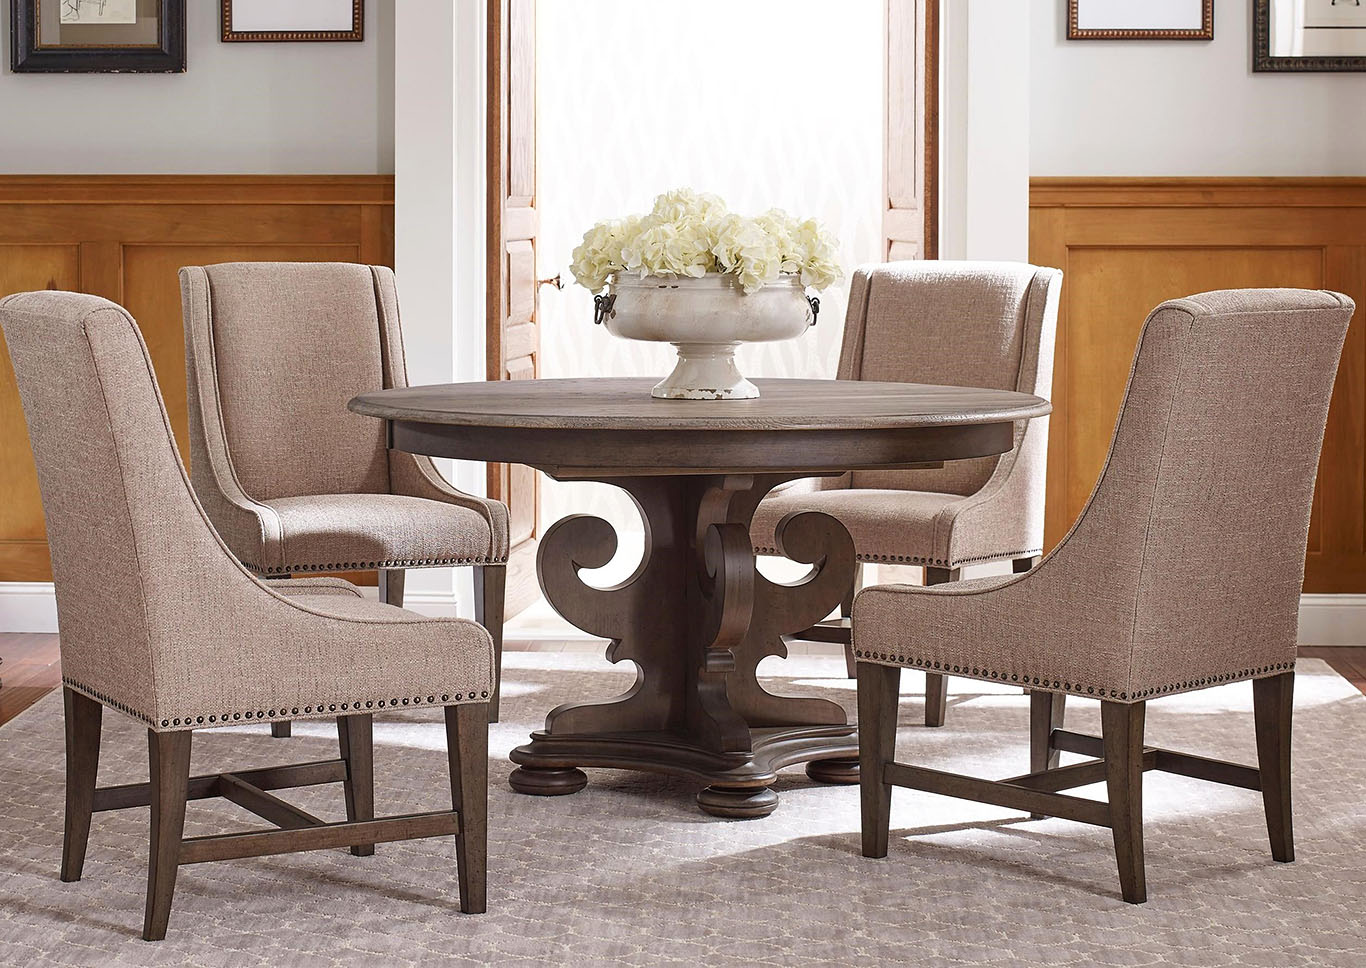 Penland S Furniture Greyson Greystone Round Dining Set W 4 Host Chairs